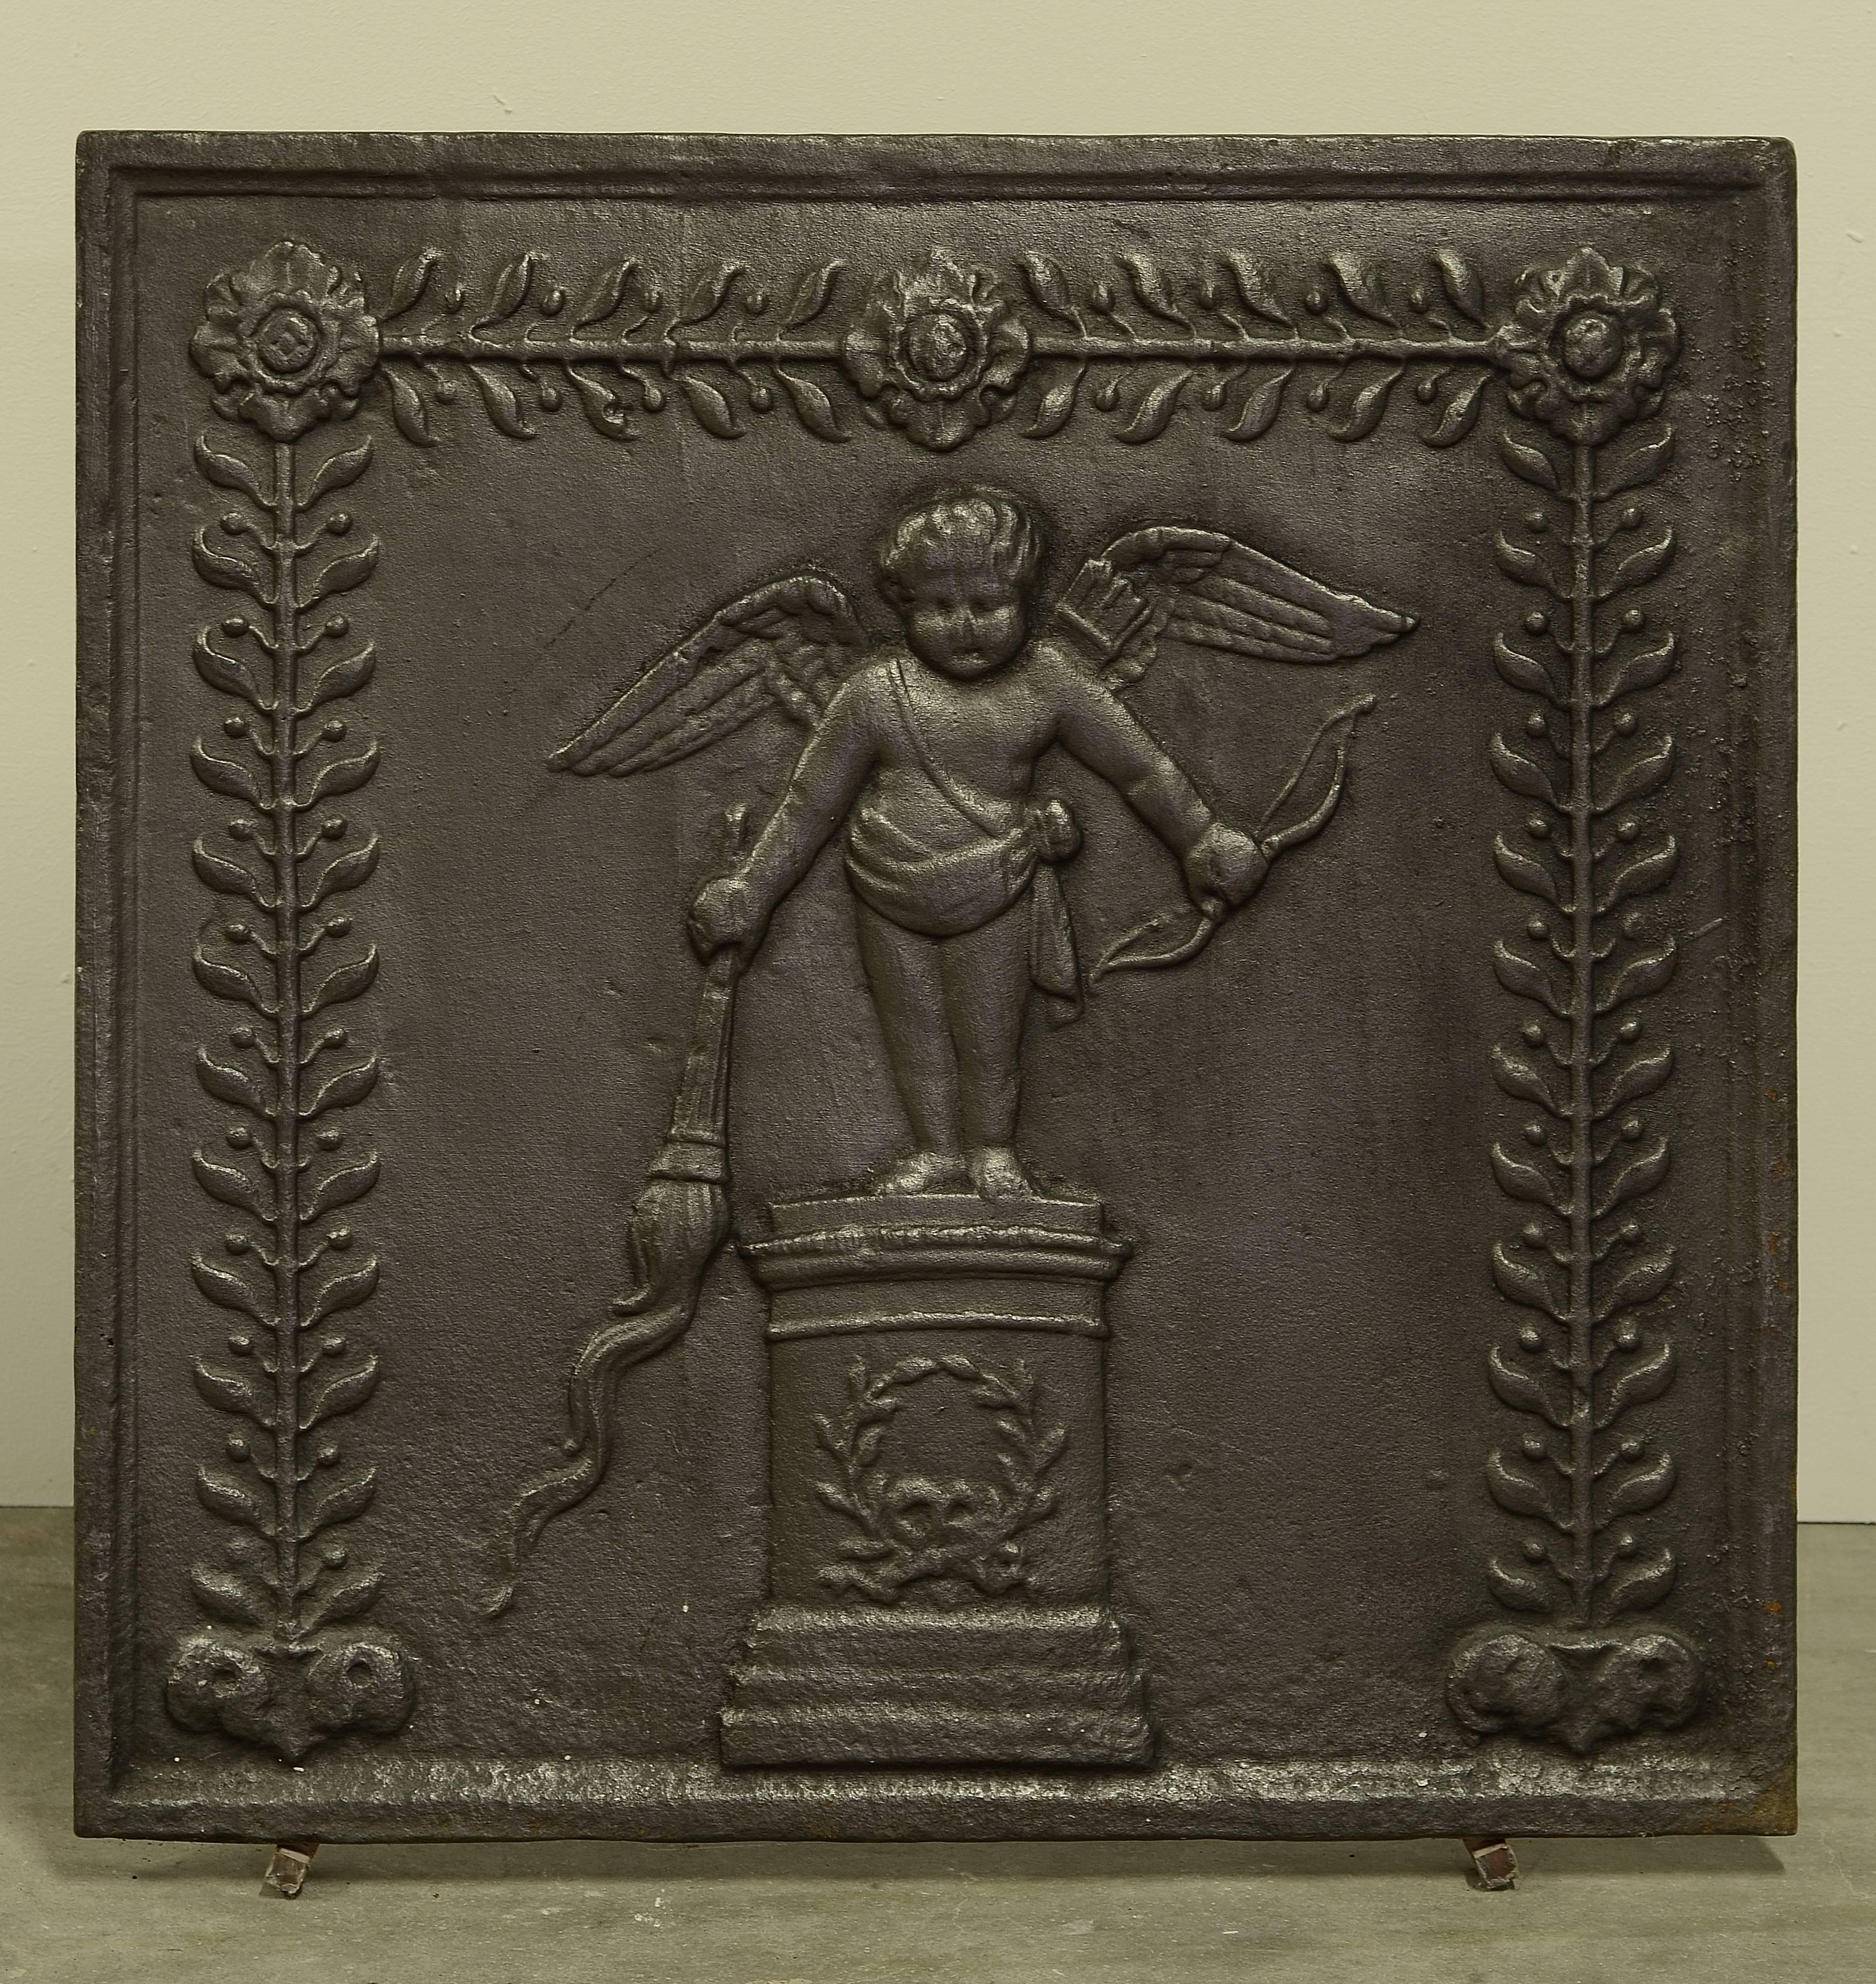 Sharp cast iron fireback displaying cupid with a bow and torch, very decorative.
19th century, France.

Great usable size and excellent condition. 
To be used in a fireplace or as a backsplash.
Can be supplied with stand.